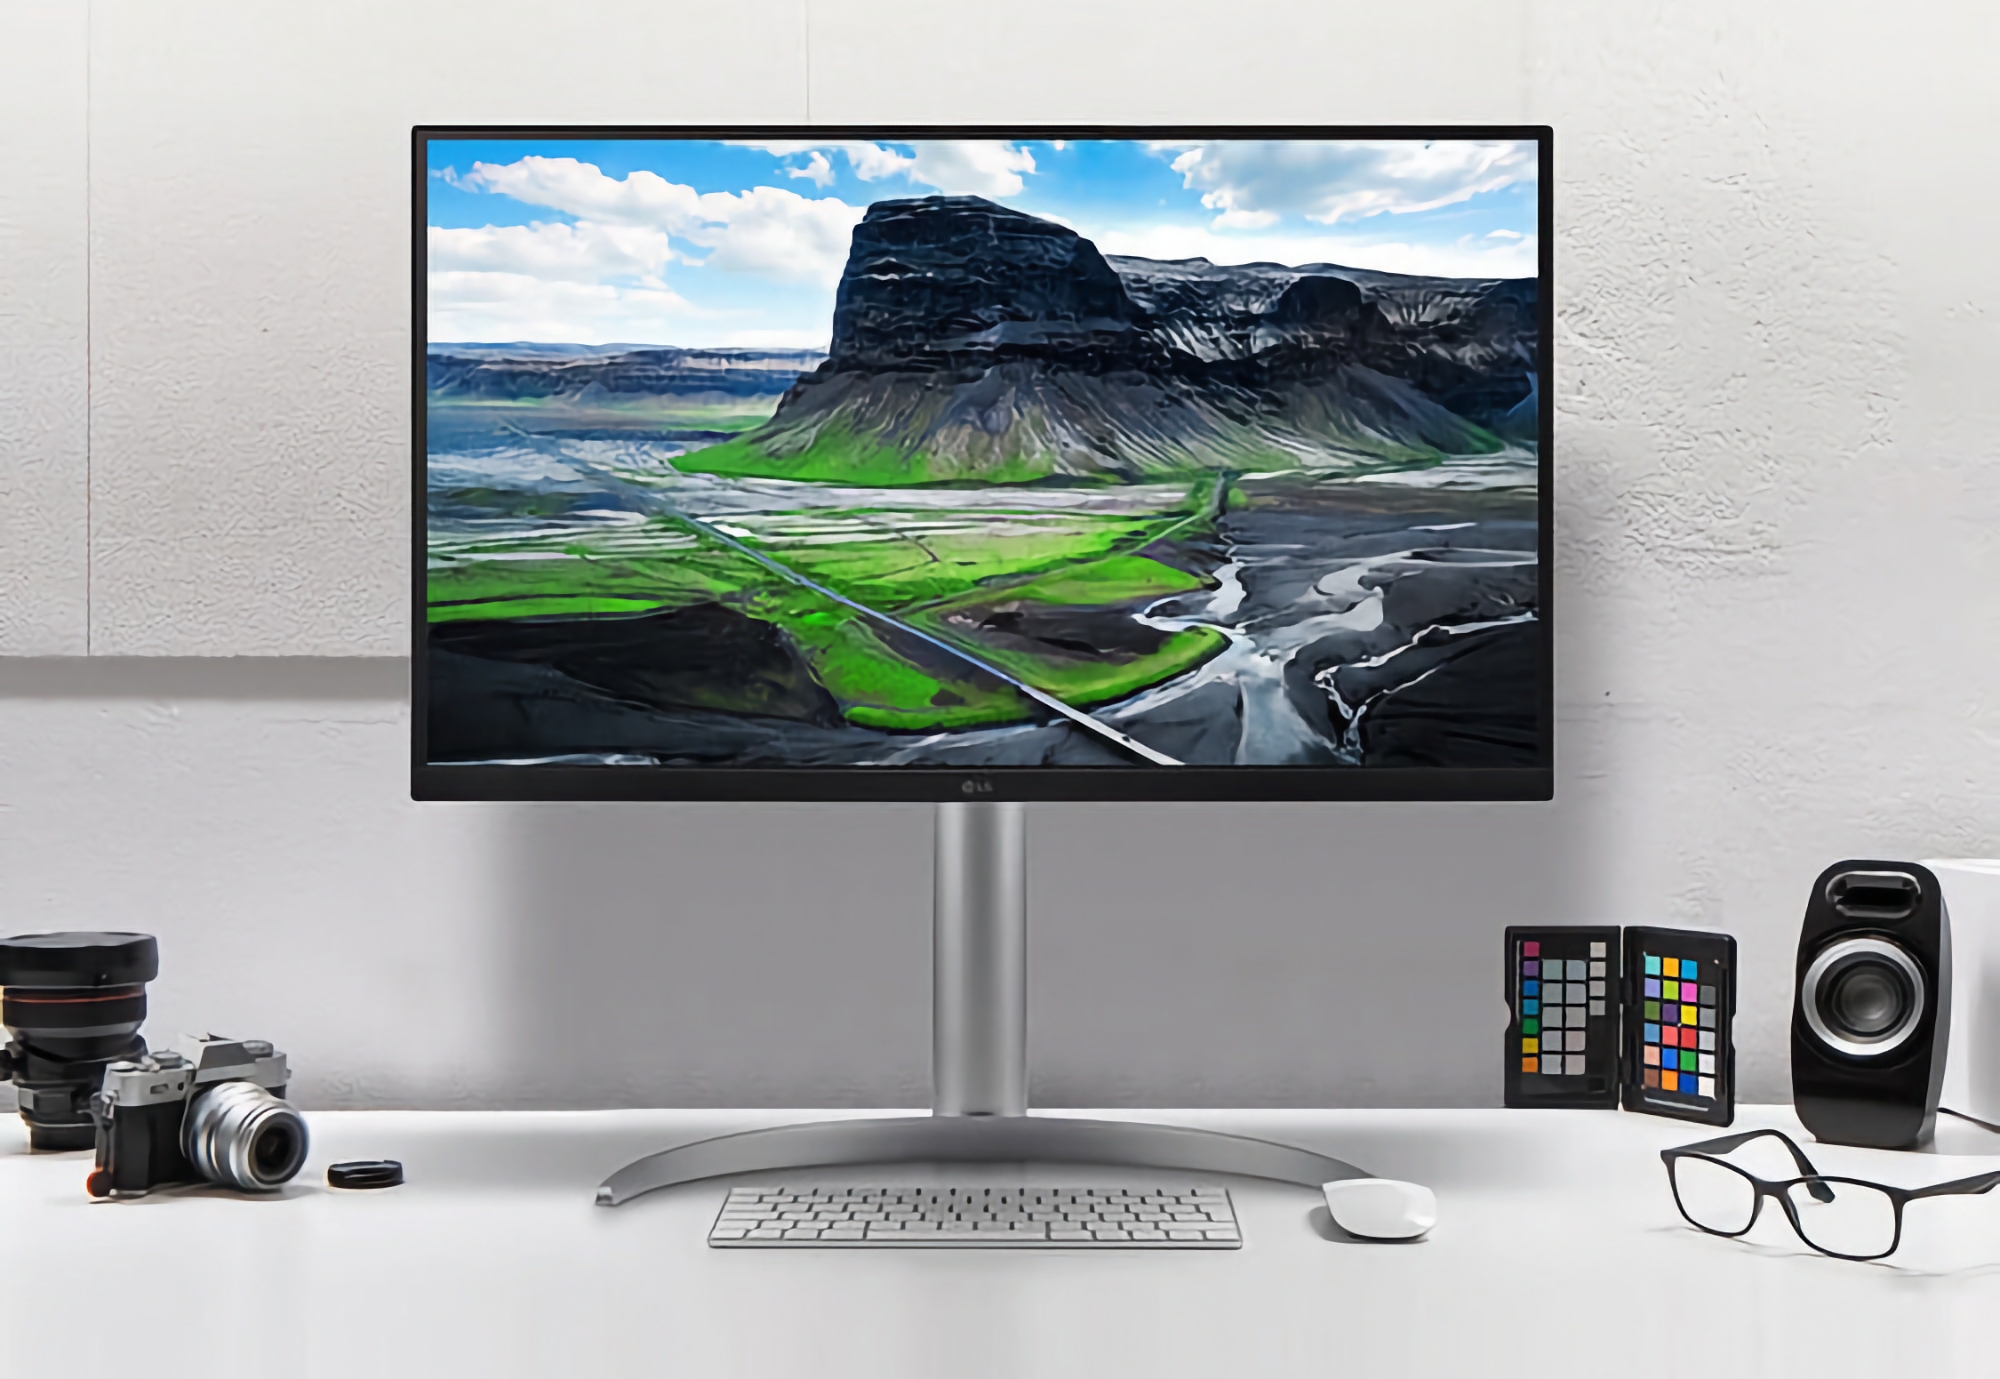 LG UltraFine 27UQ850V: 4K monitor with 27-inch IPS Black screen and 90W USB-C support with Power Delivery